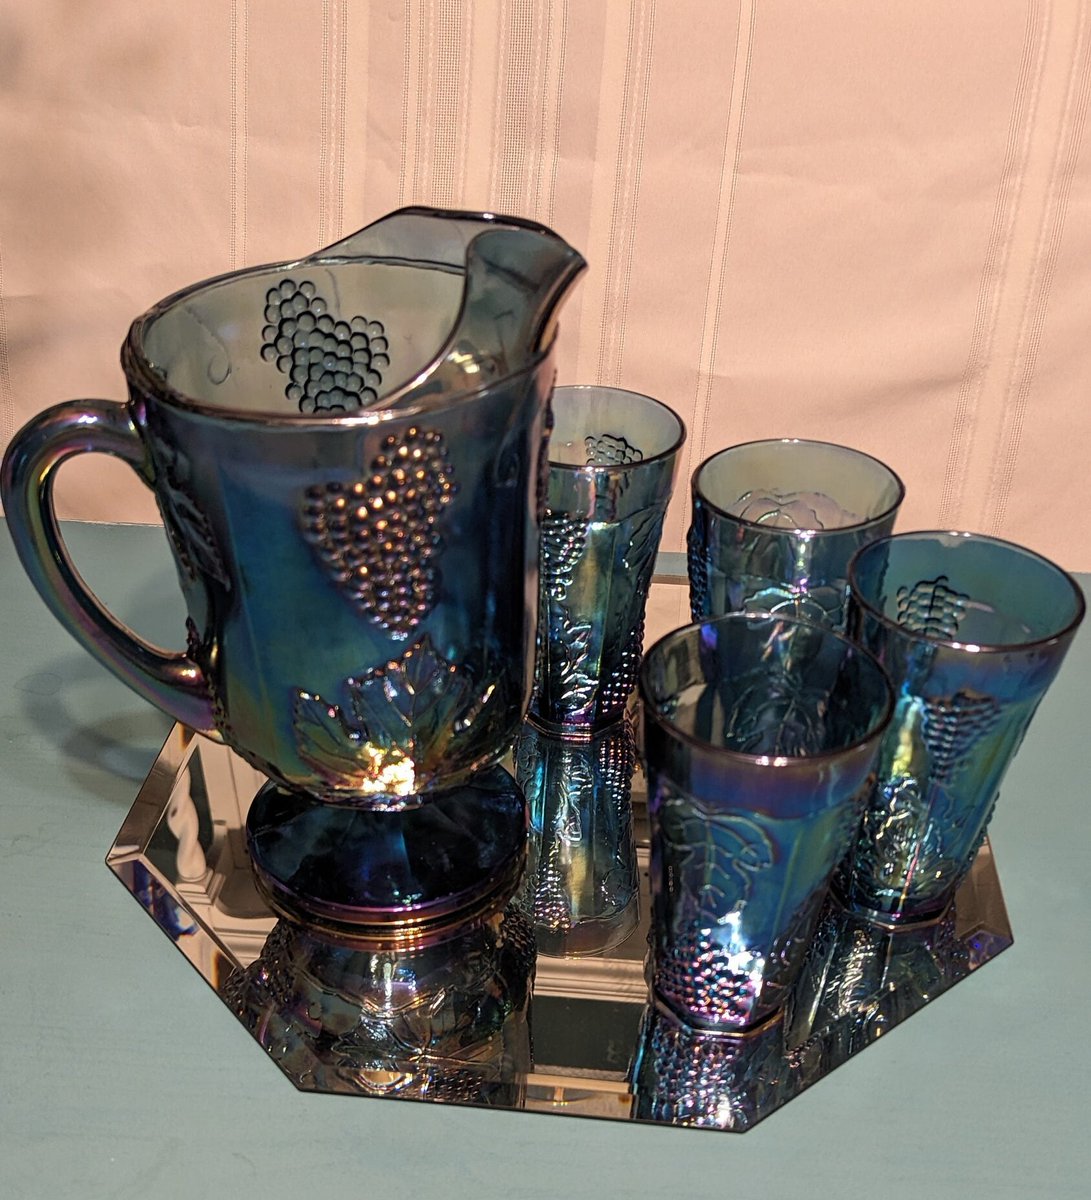 Vintage STUNNING Blue Harvest Grape Carnival Glass Pitcher and 4 Glasses (tumblers), 1960's Indiana Glass, PERFECT Condition tuppu.net/97ef52a0 #Etsy #AmazingFunVintage #IndianaGlass